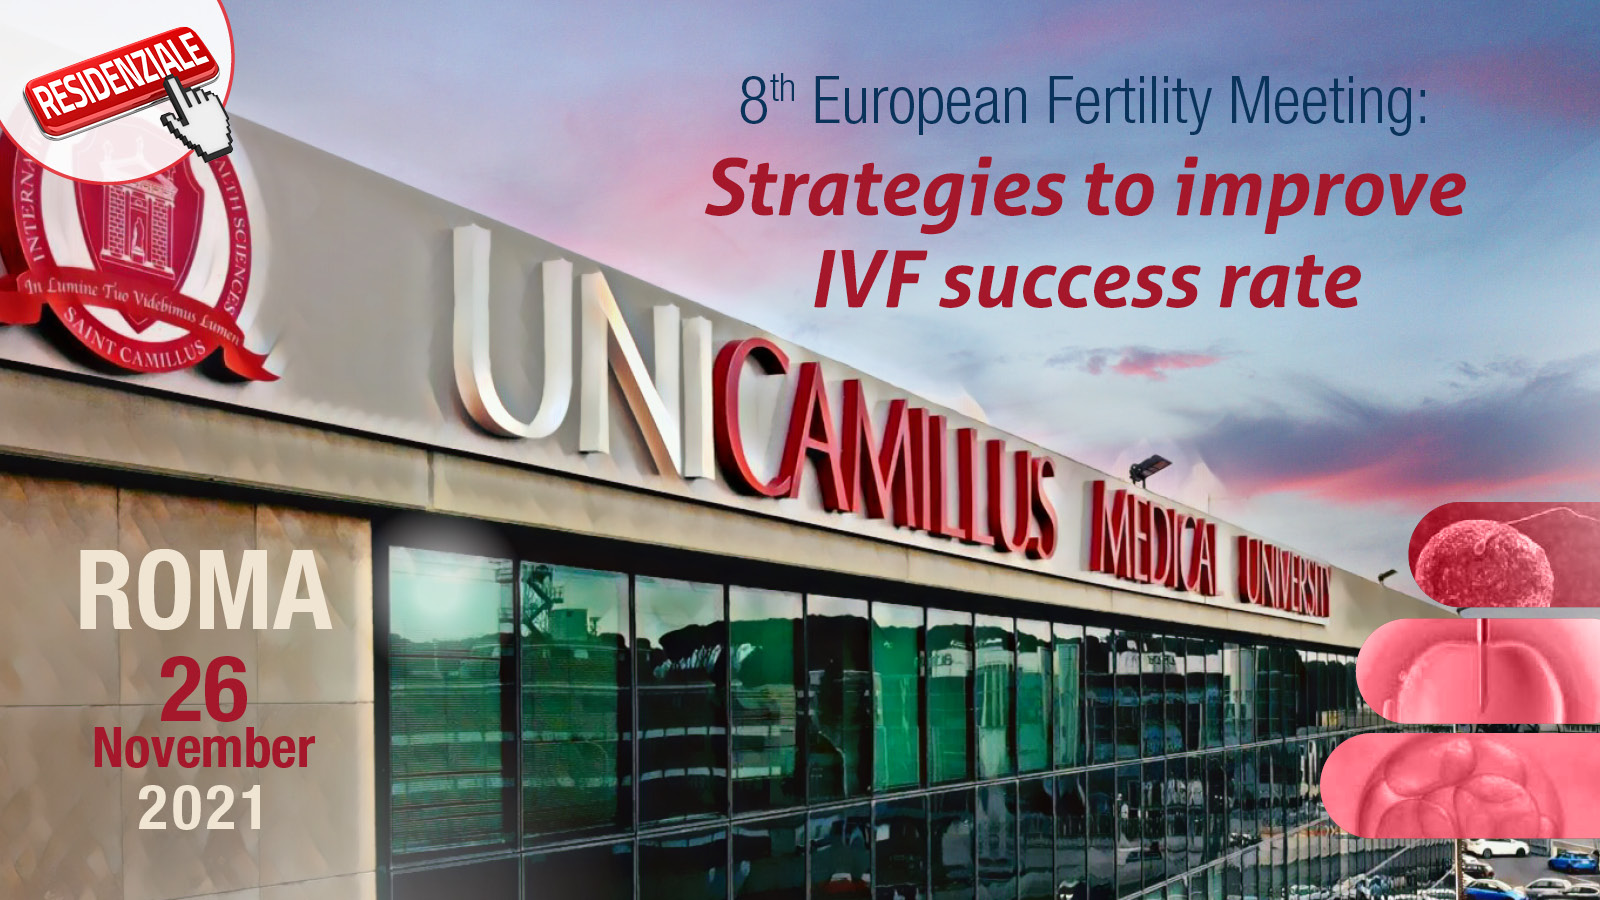 8th European Fertility Meeting: Strategies to improve IVF success rate